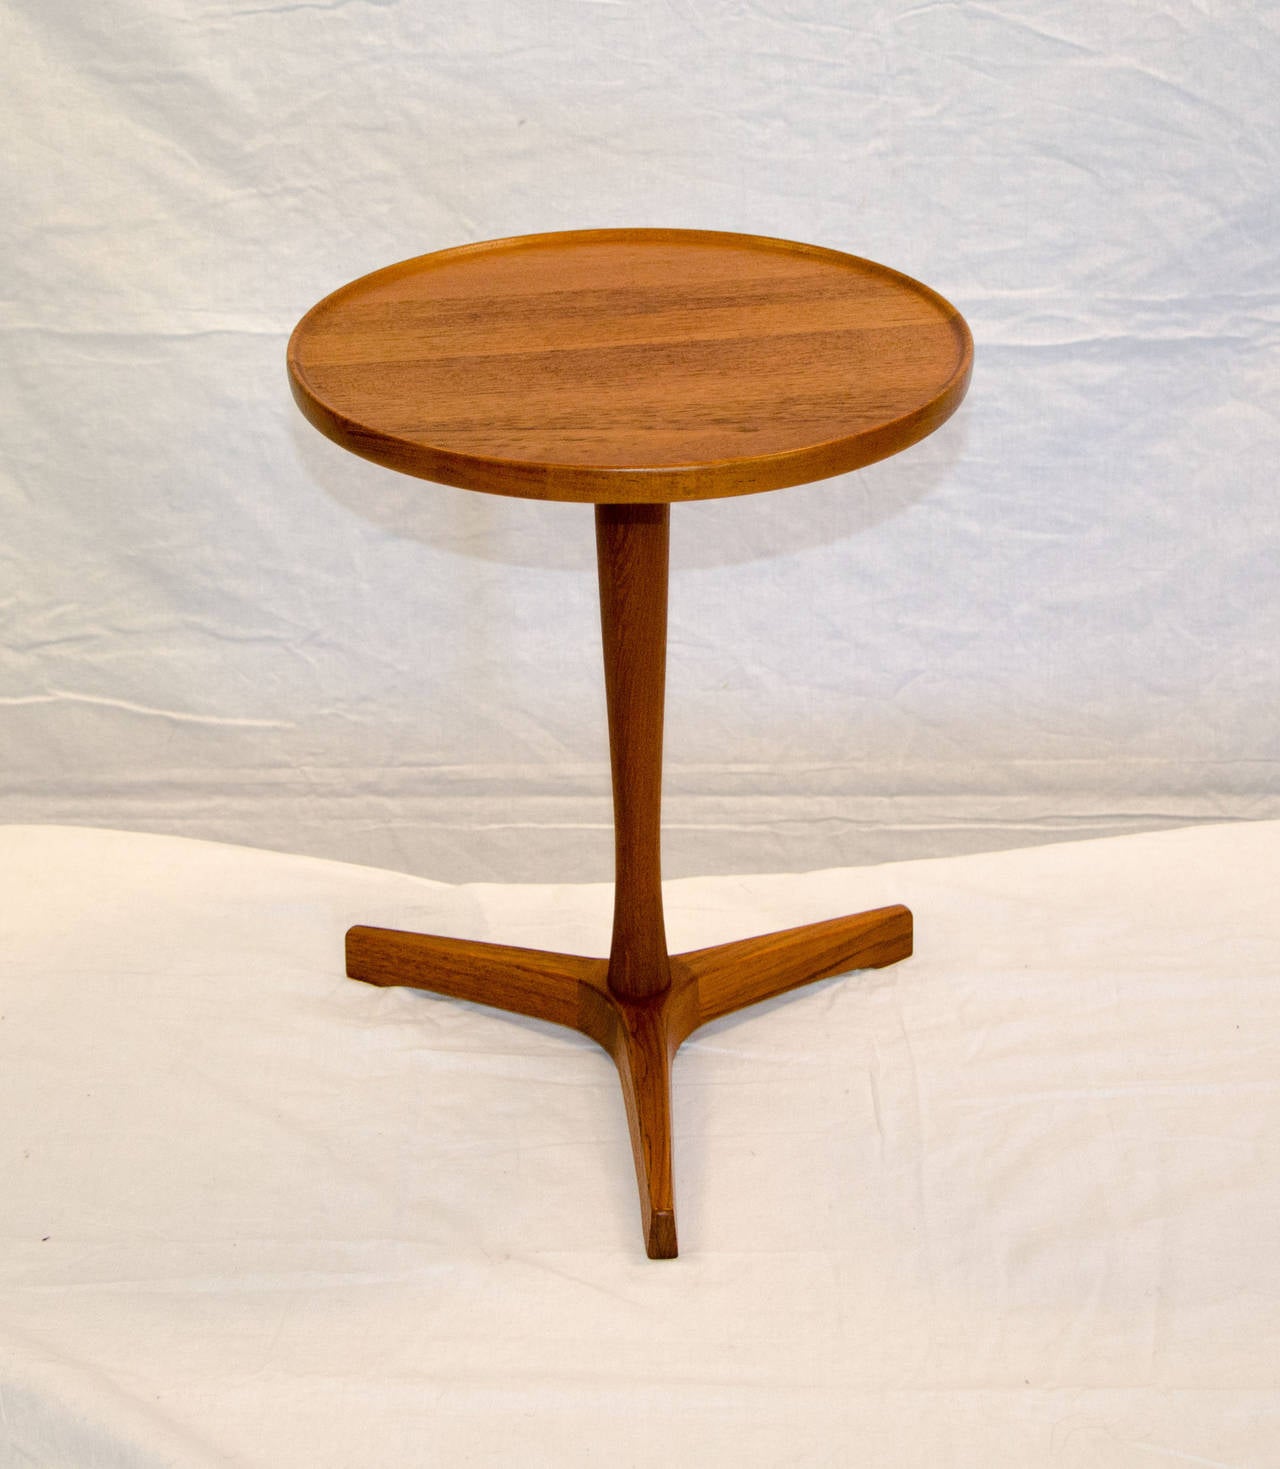 Useful small round tripod pedestal accent table designed by Hans Andersen, signed on flip side of circular top. The top and base disassemble for box shipping. The circular top is accented by a slightly raised edge.